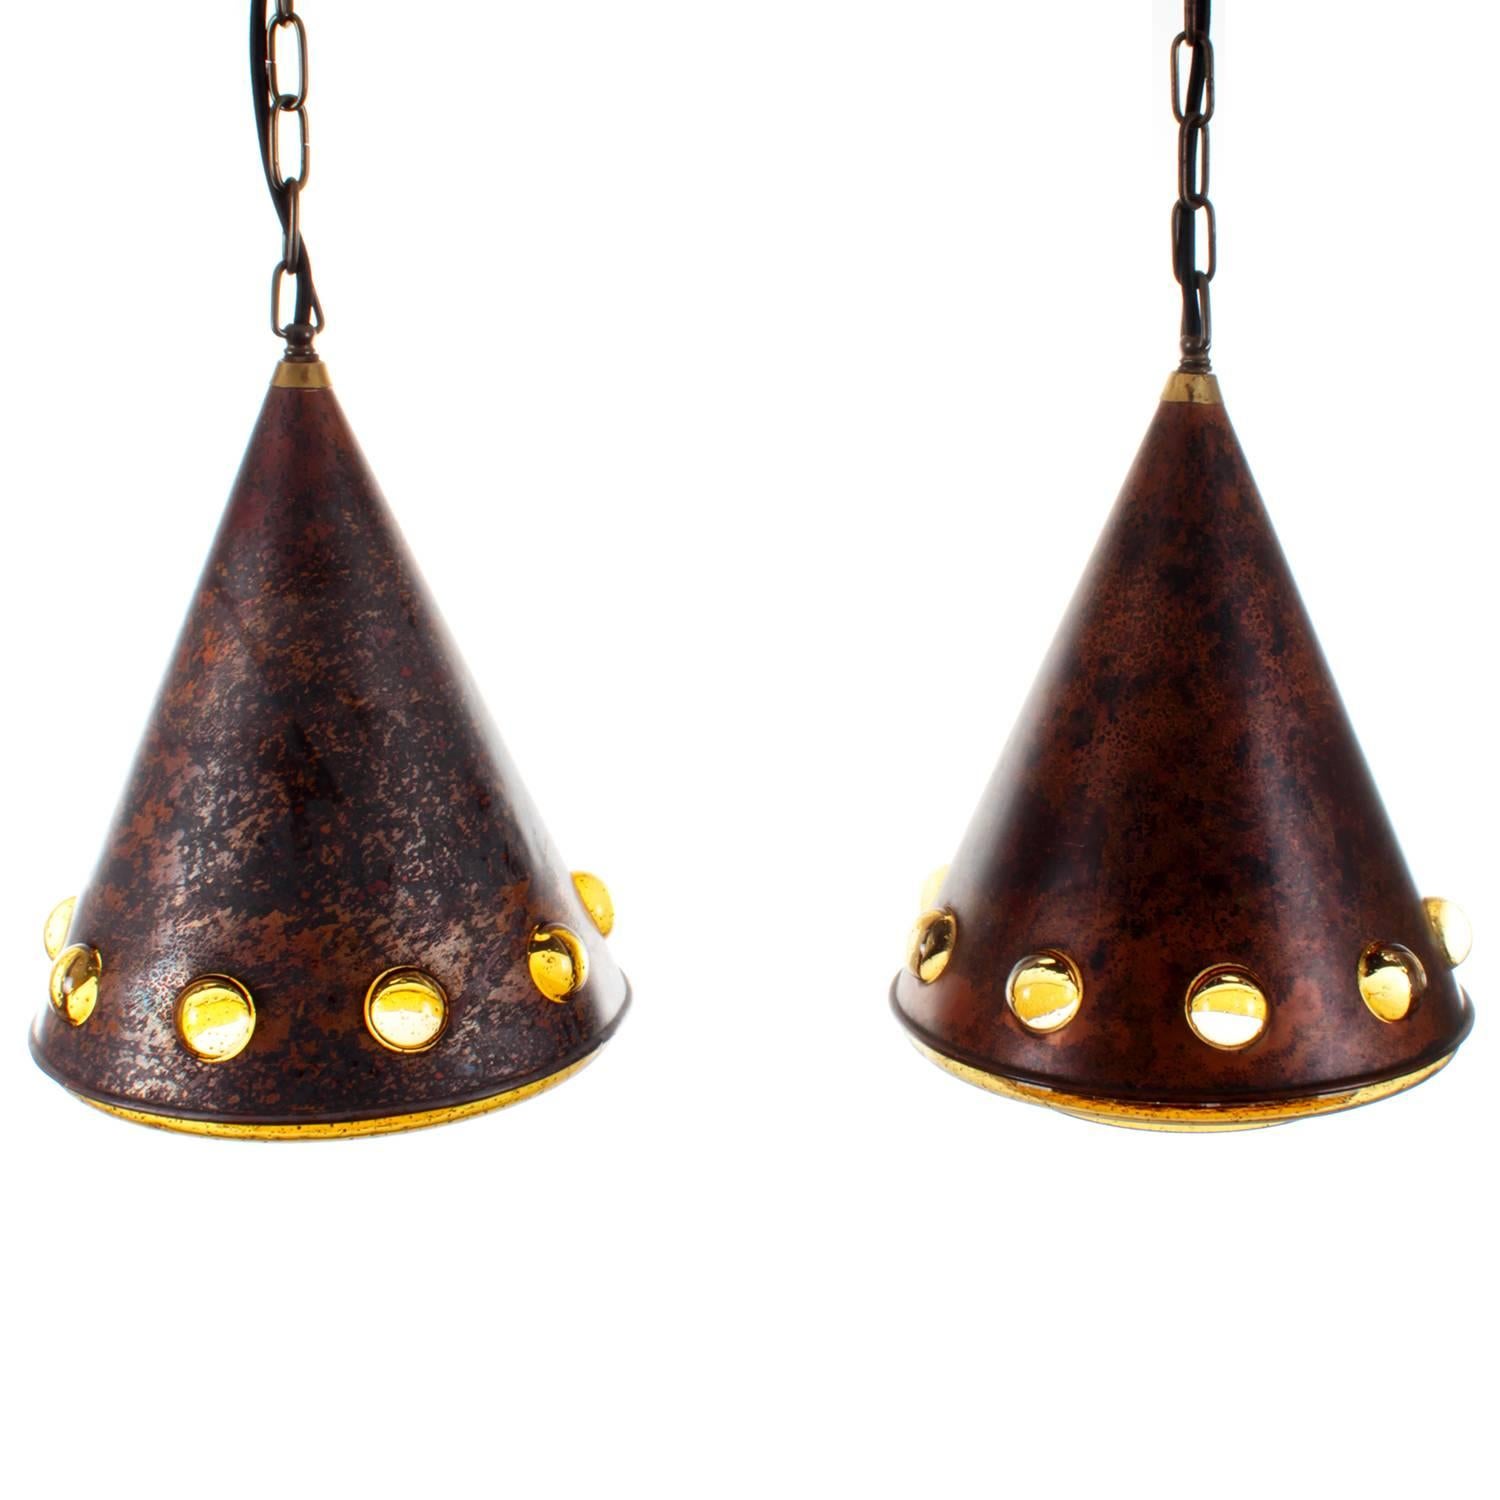 Dutch Pendant Pair by Nanny Still-Mckinney for RAAK in the 1960s